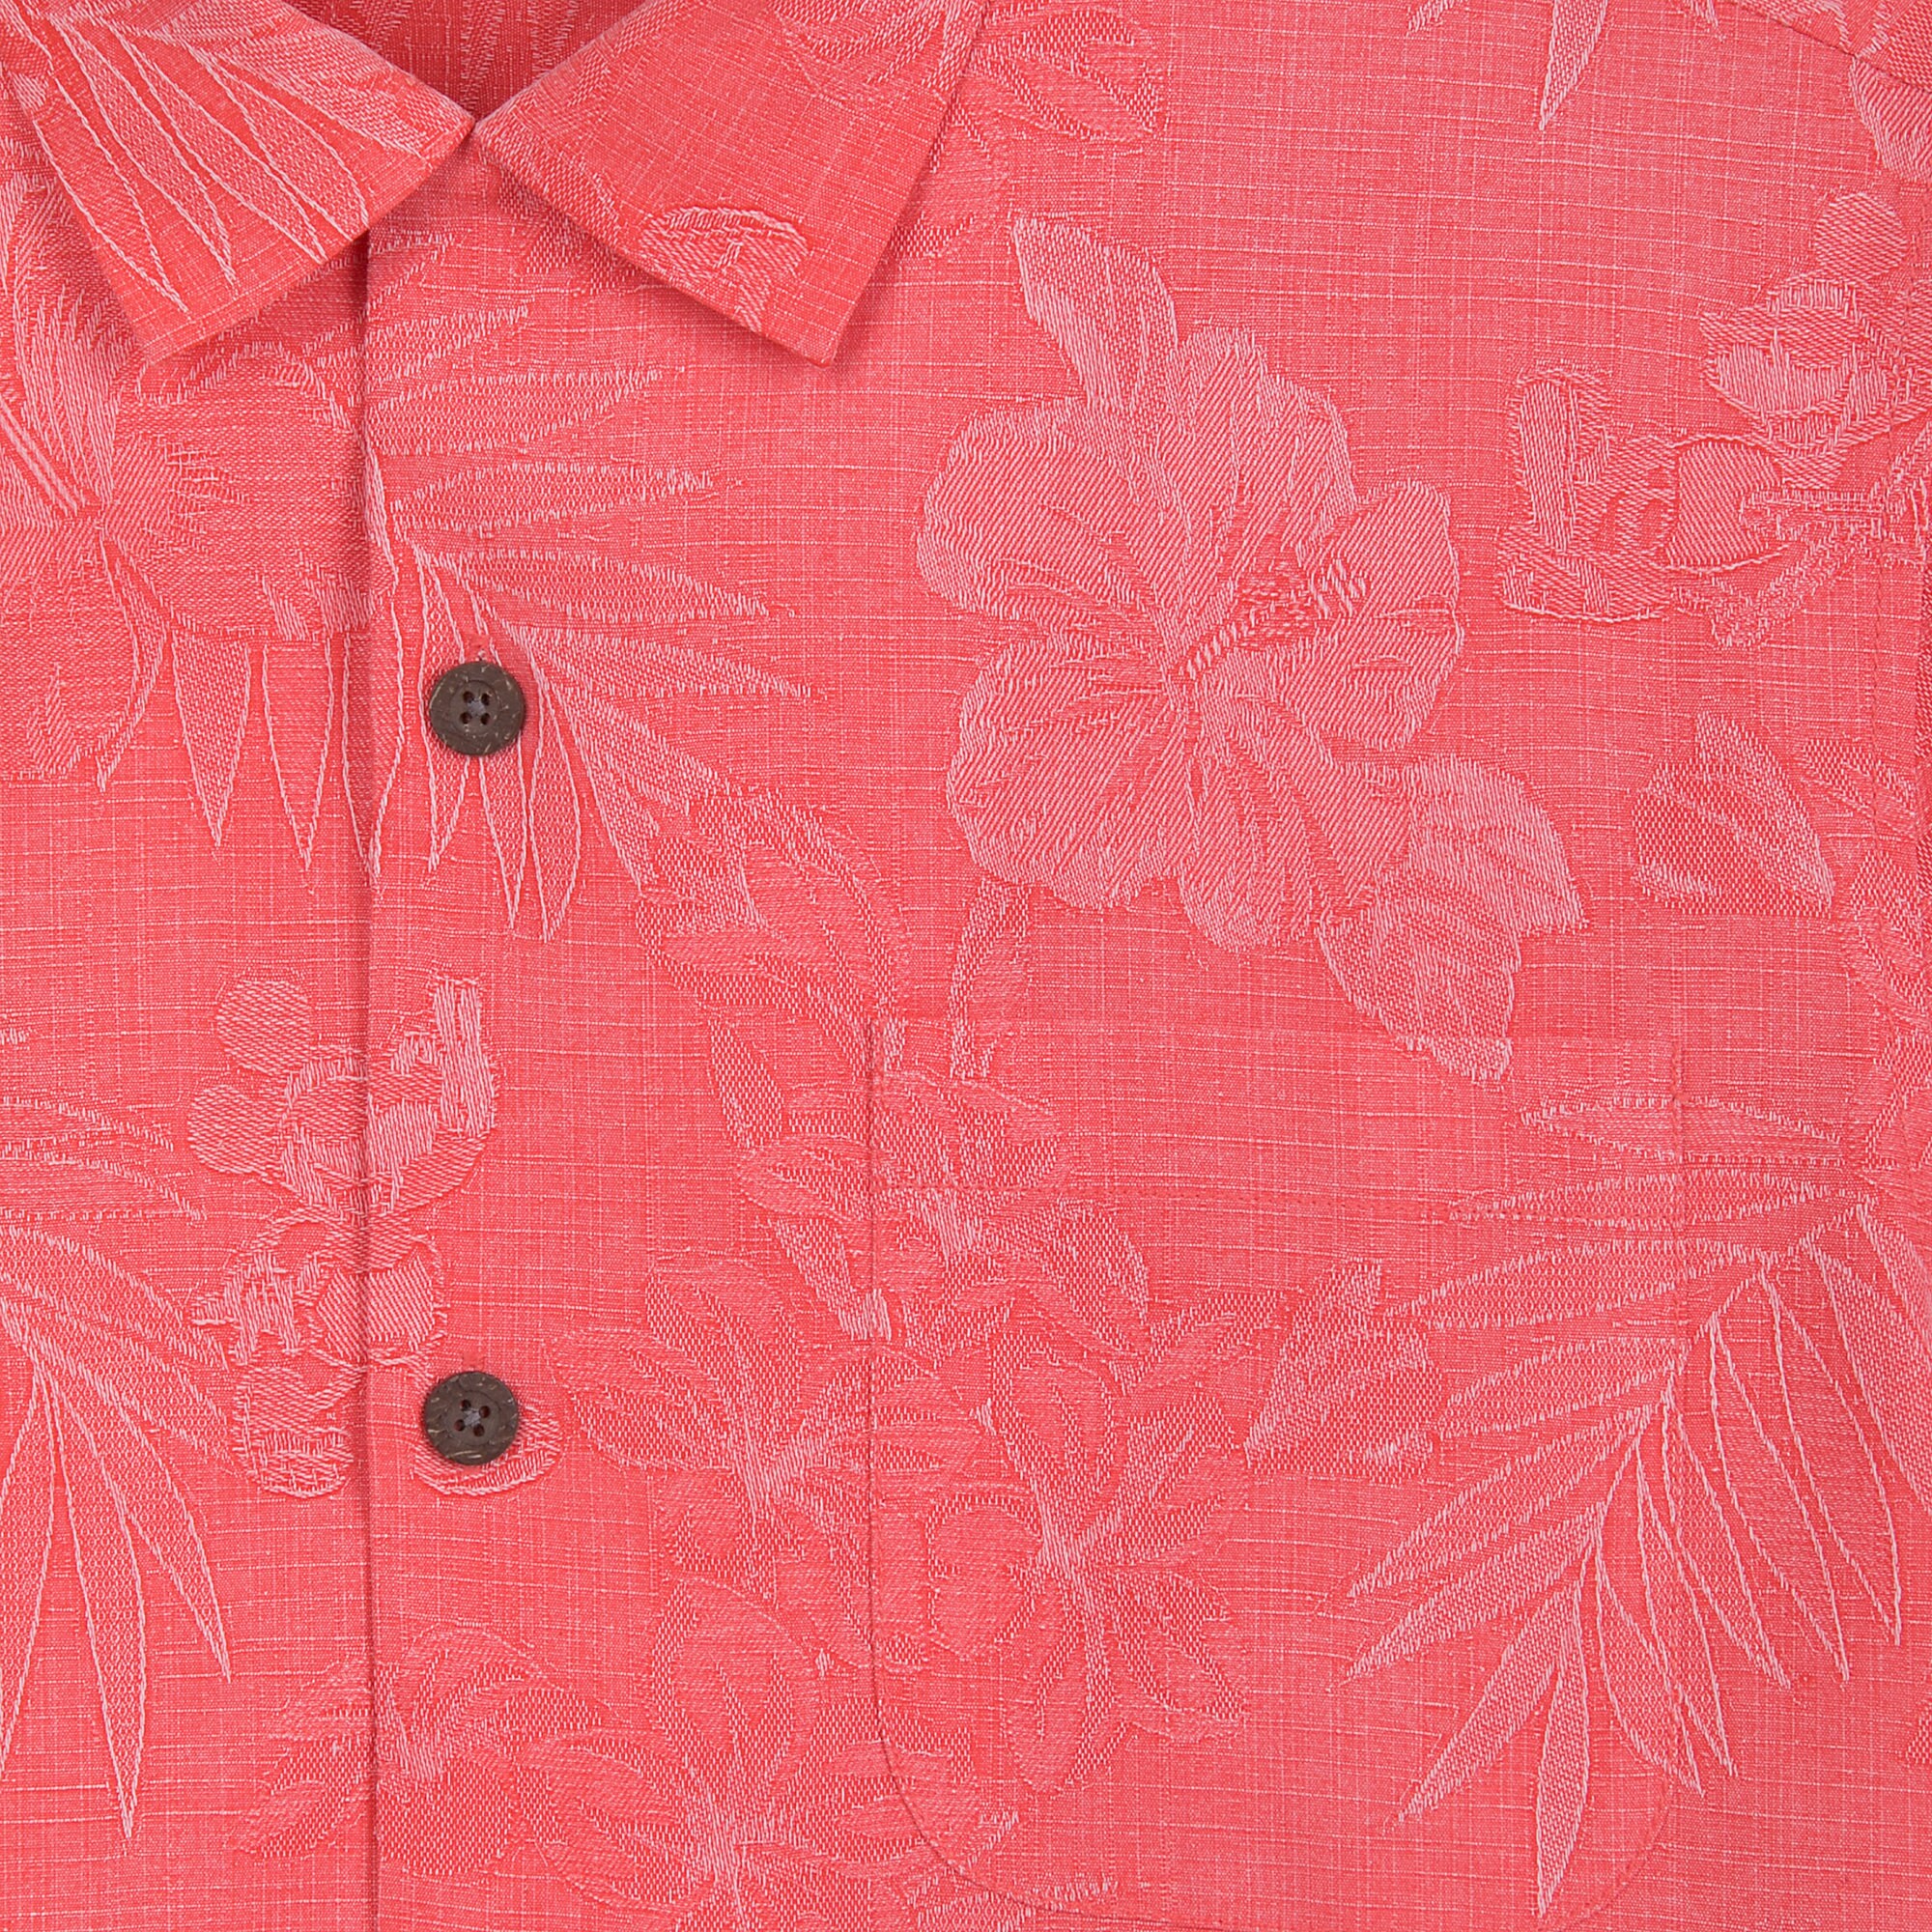 Mickey Mouse Jacquard Aloha Silk Shirt for Men by Tommy Bahama - Coral